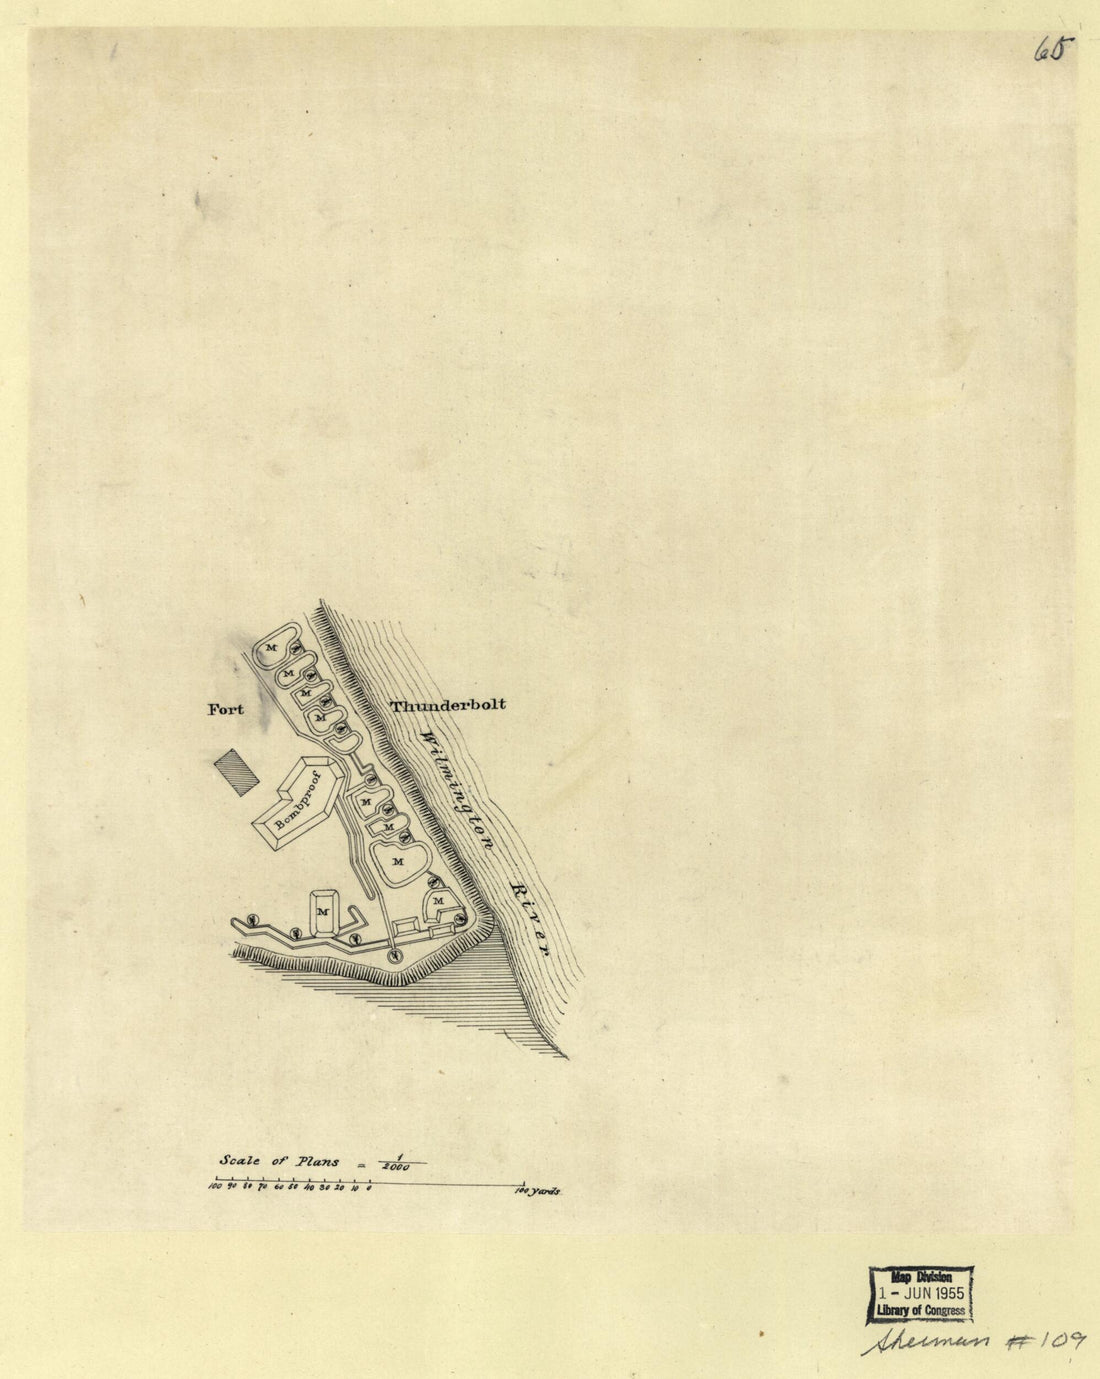 This old map of Fort Thunderbolt from 1864 was created by  in 1864